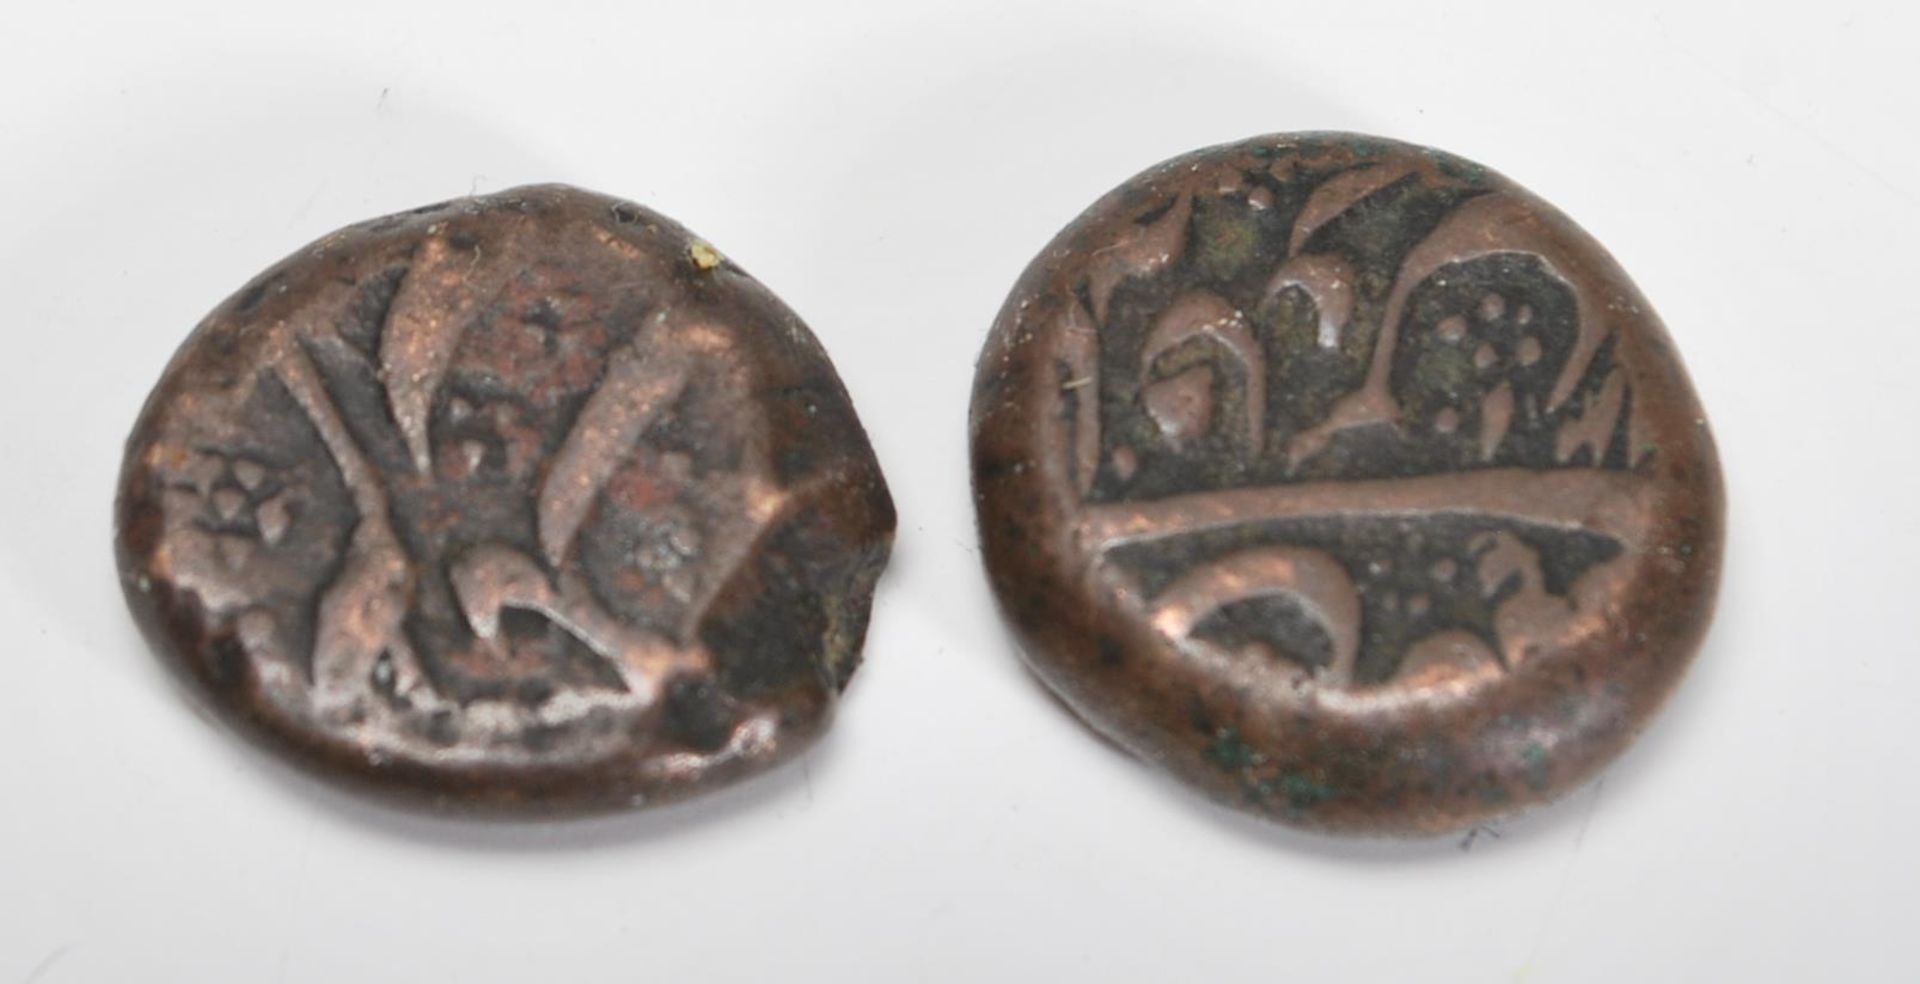 Two 18th century Indian Copper coins believed to be Princely State. Each with broad swords, one